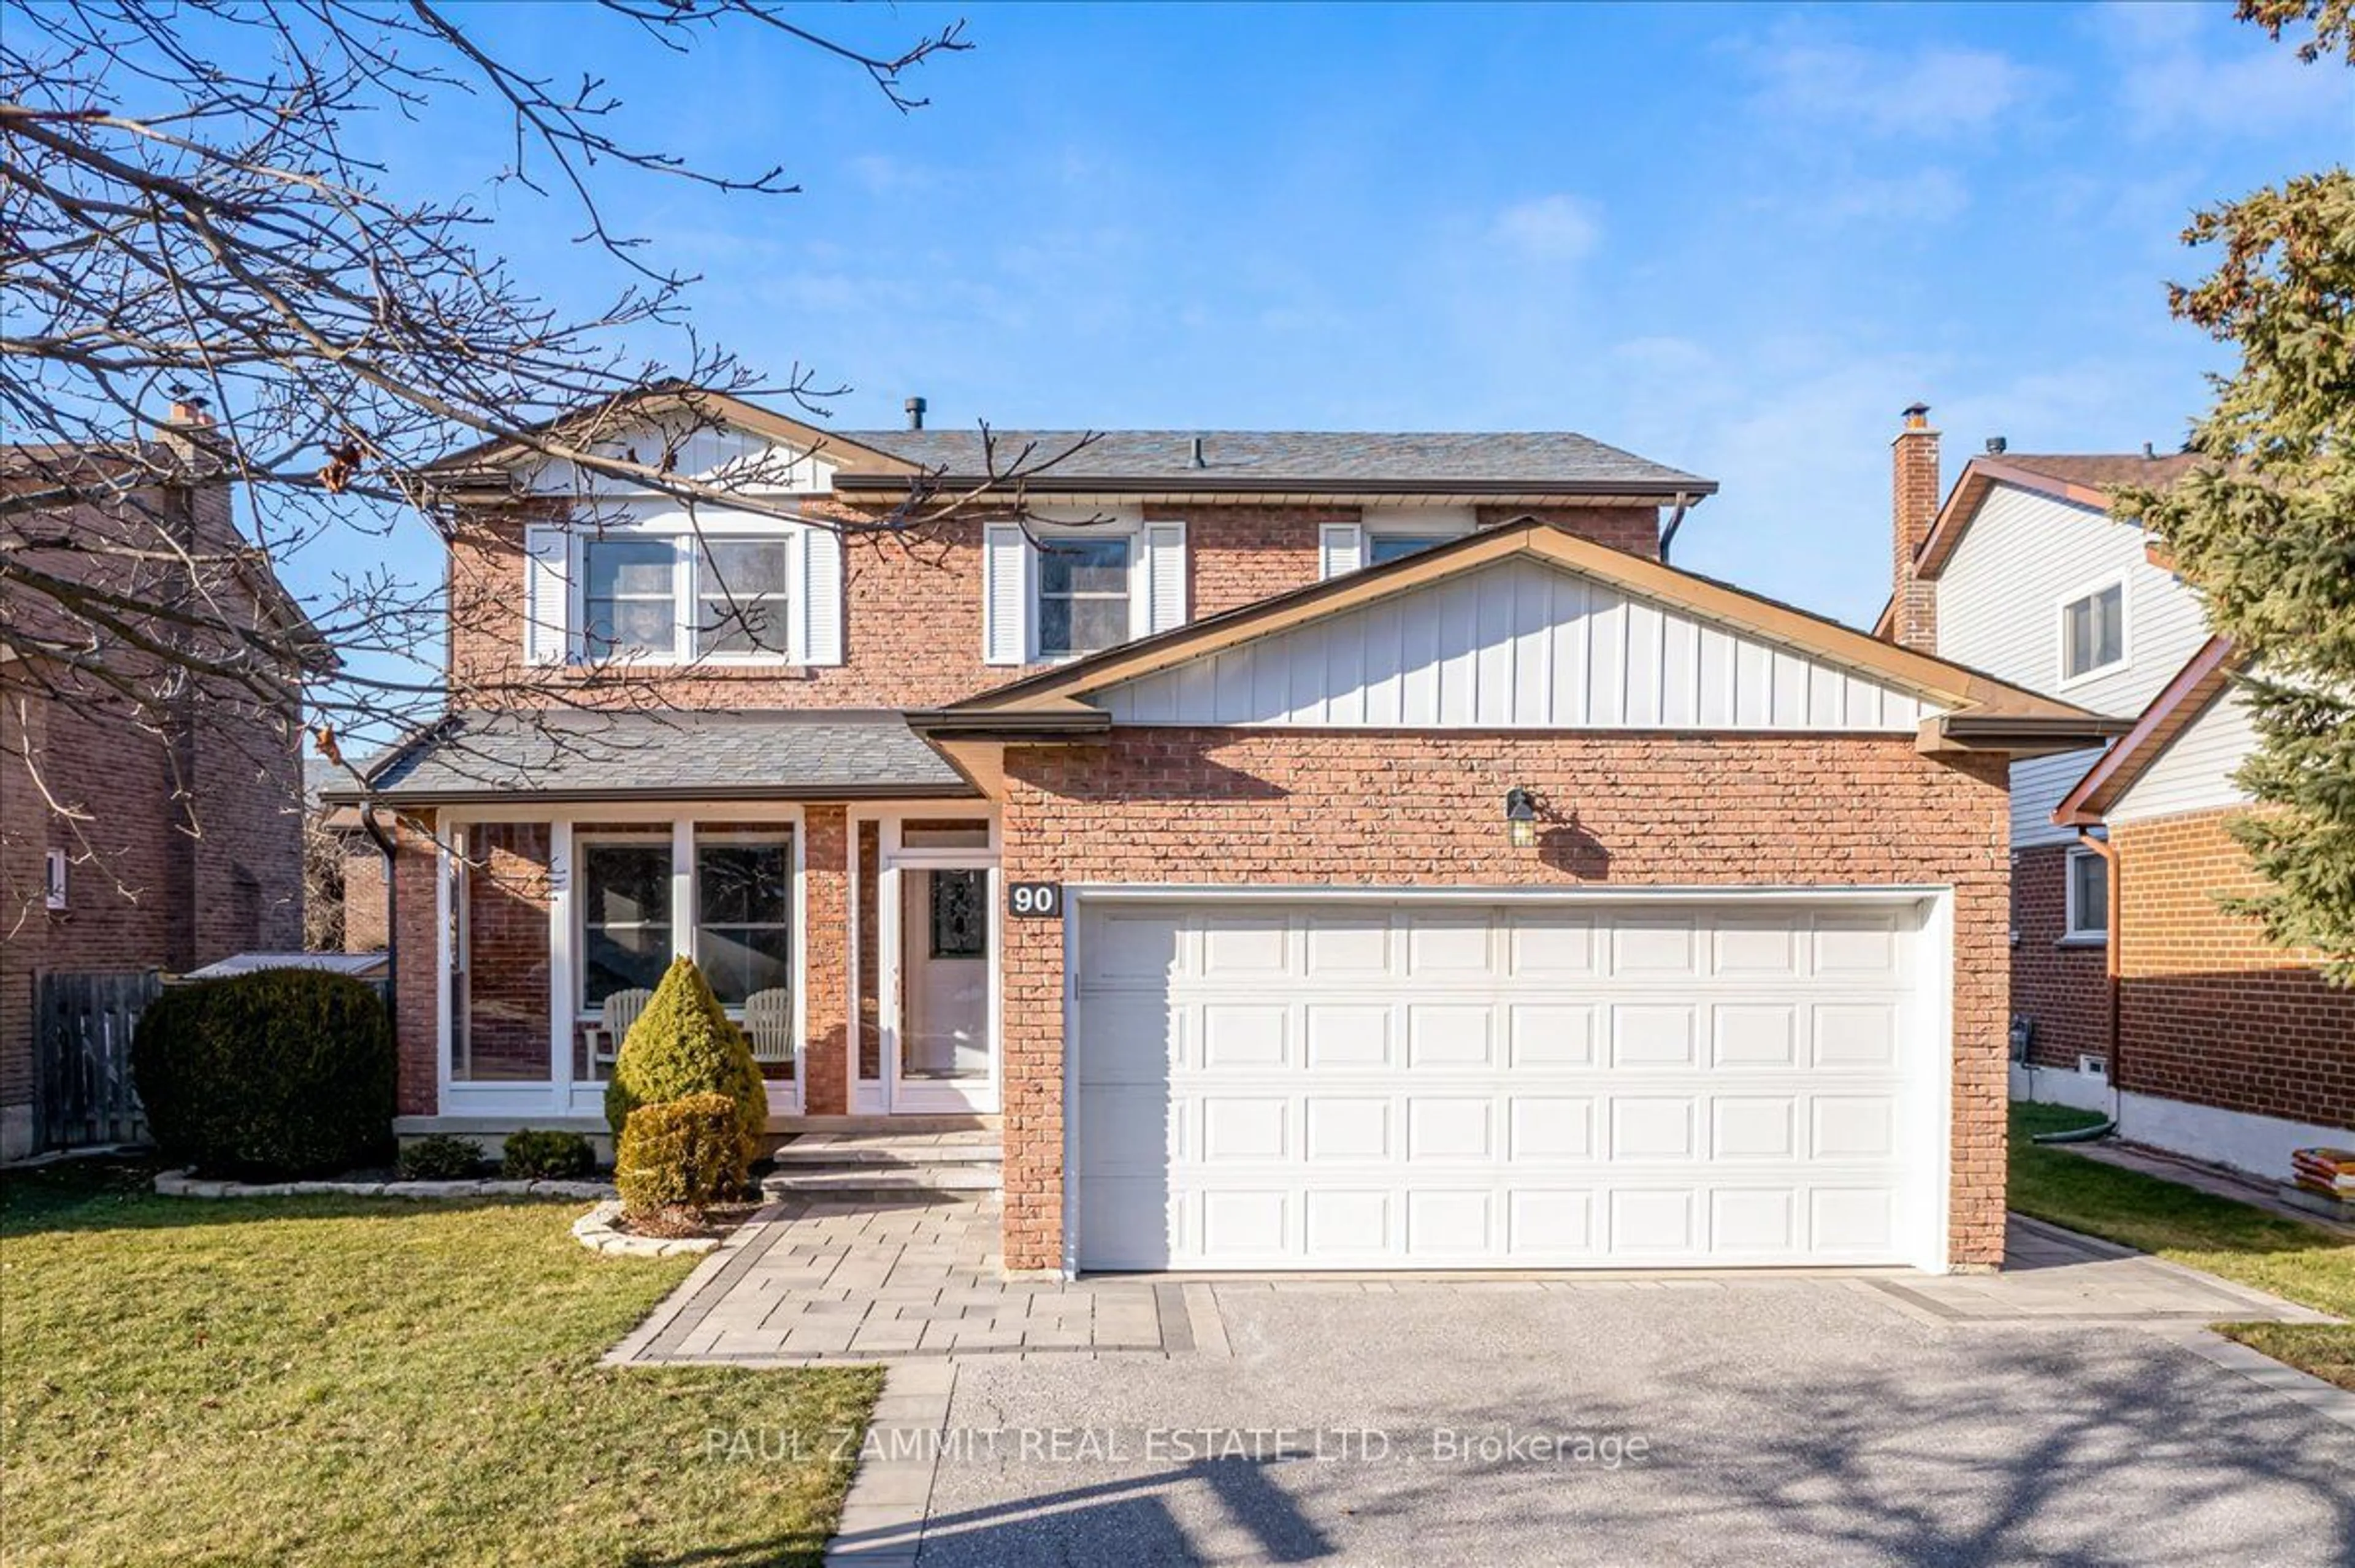 Home with brick exterior material for 90 Kings College Rd, Markham Ontario L3T 5J8